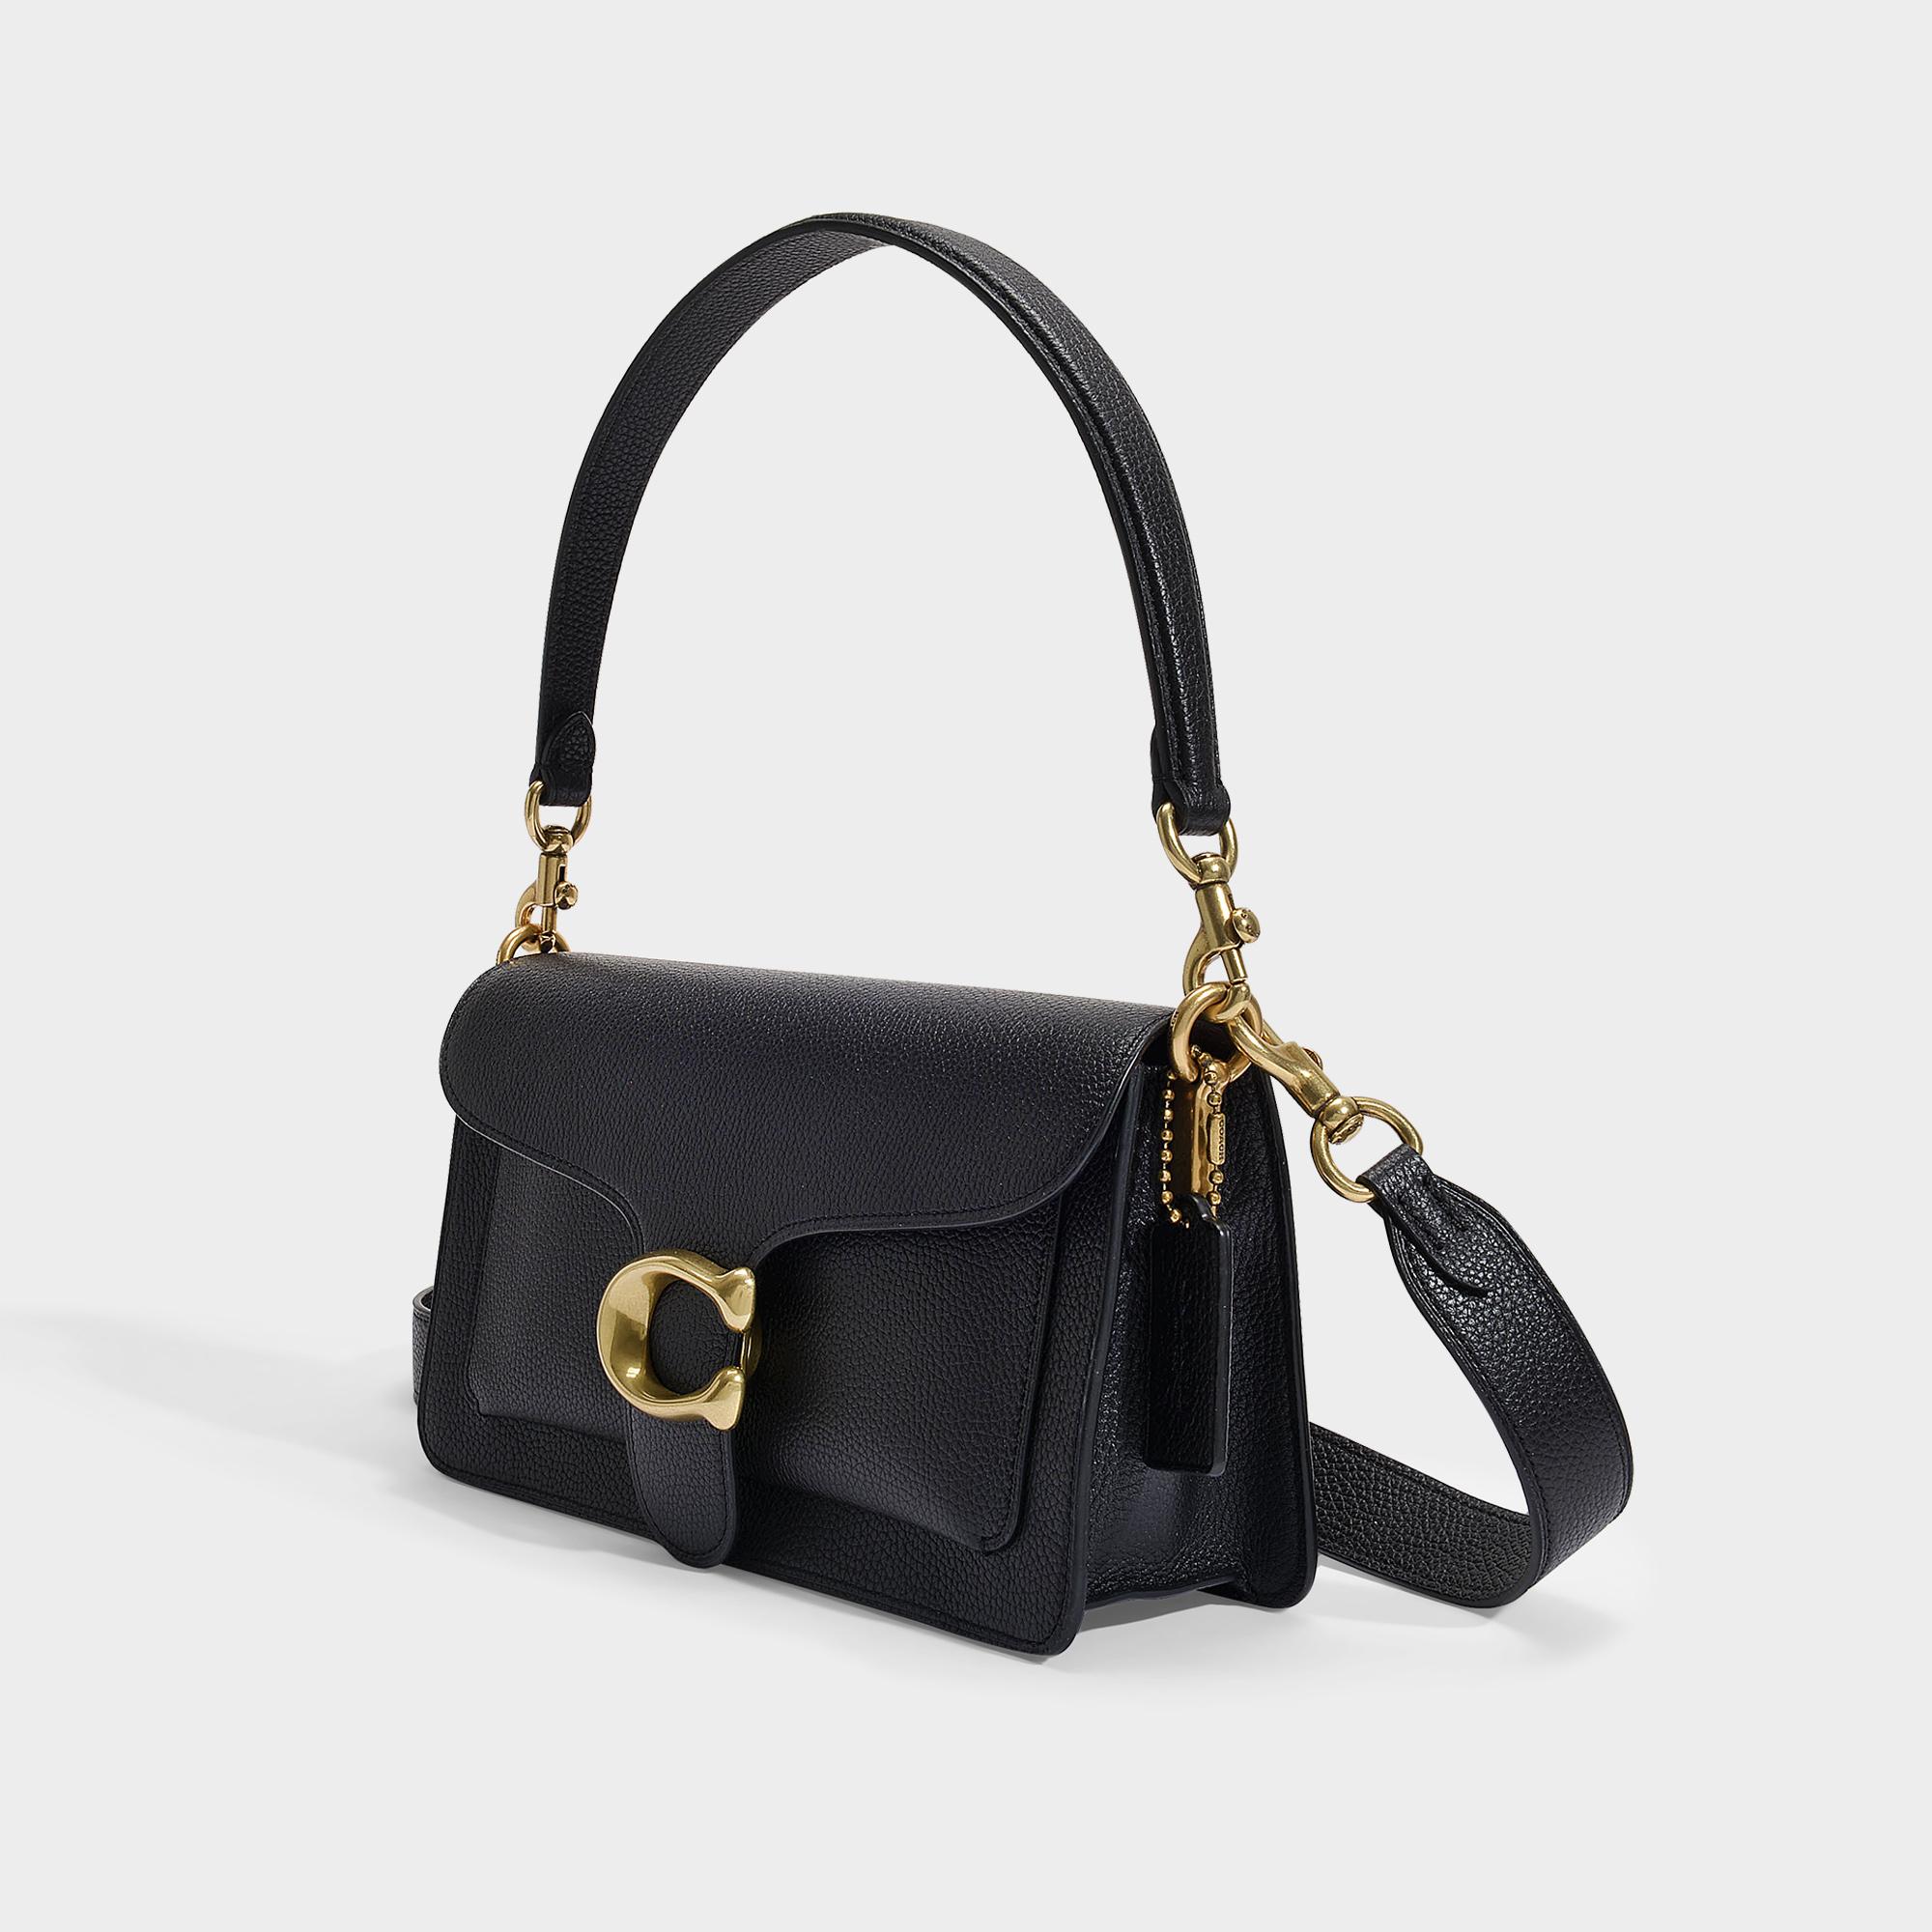 Discover more than 70 coach small bag black best - esthdonghoadian